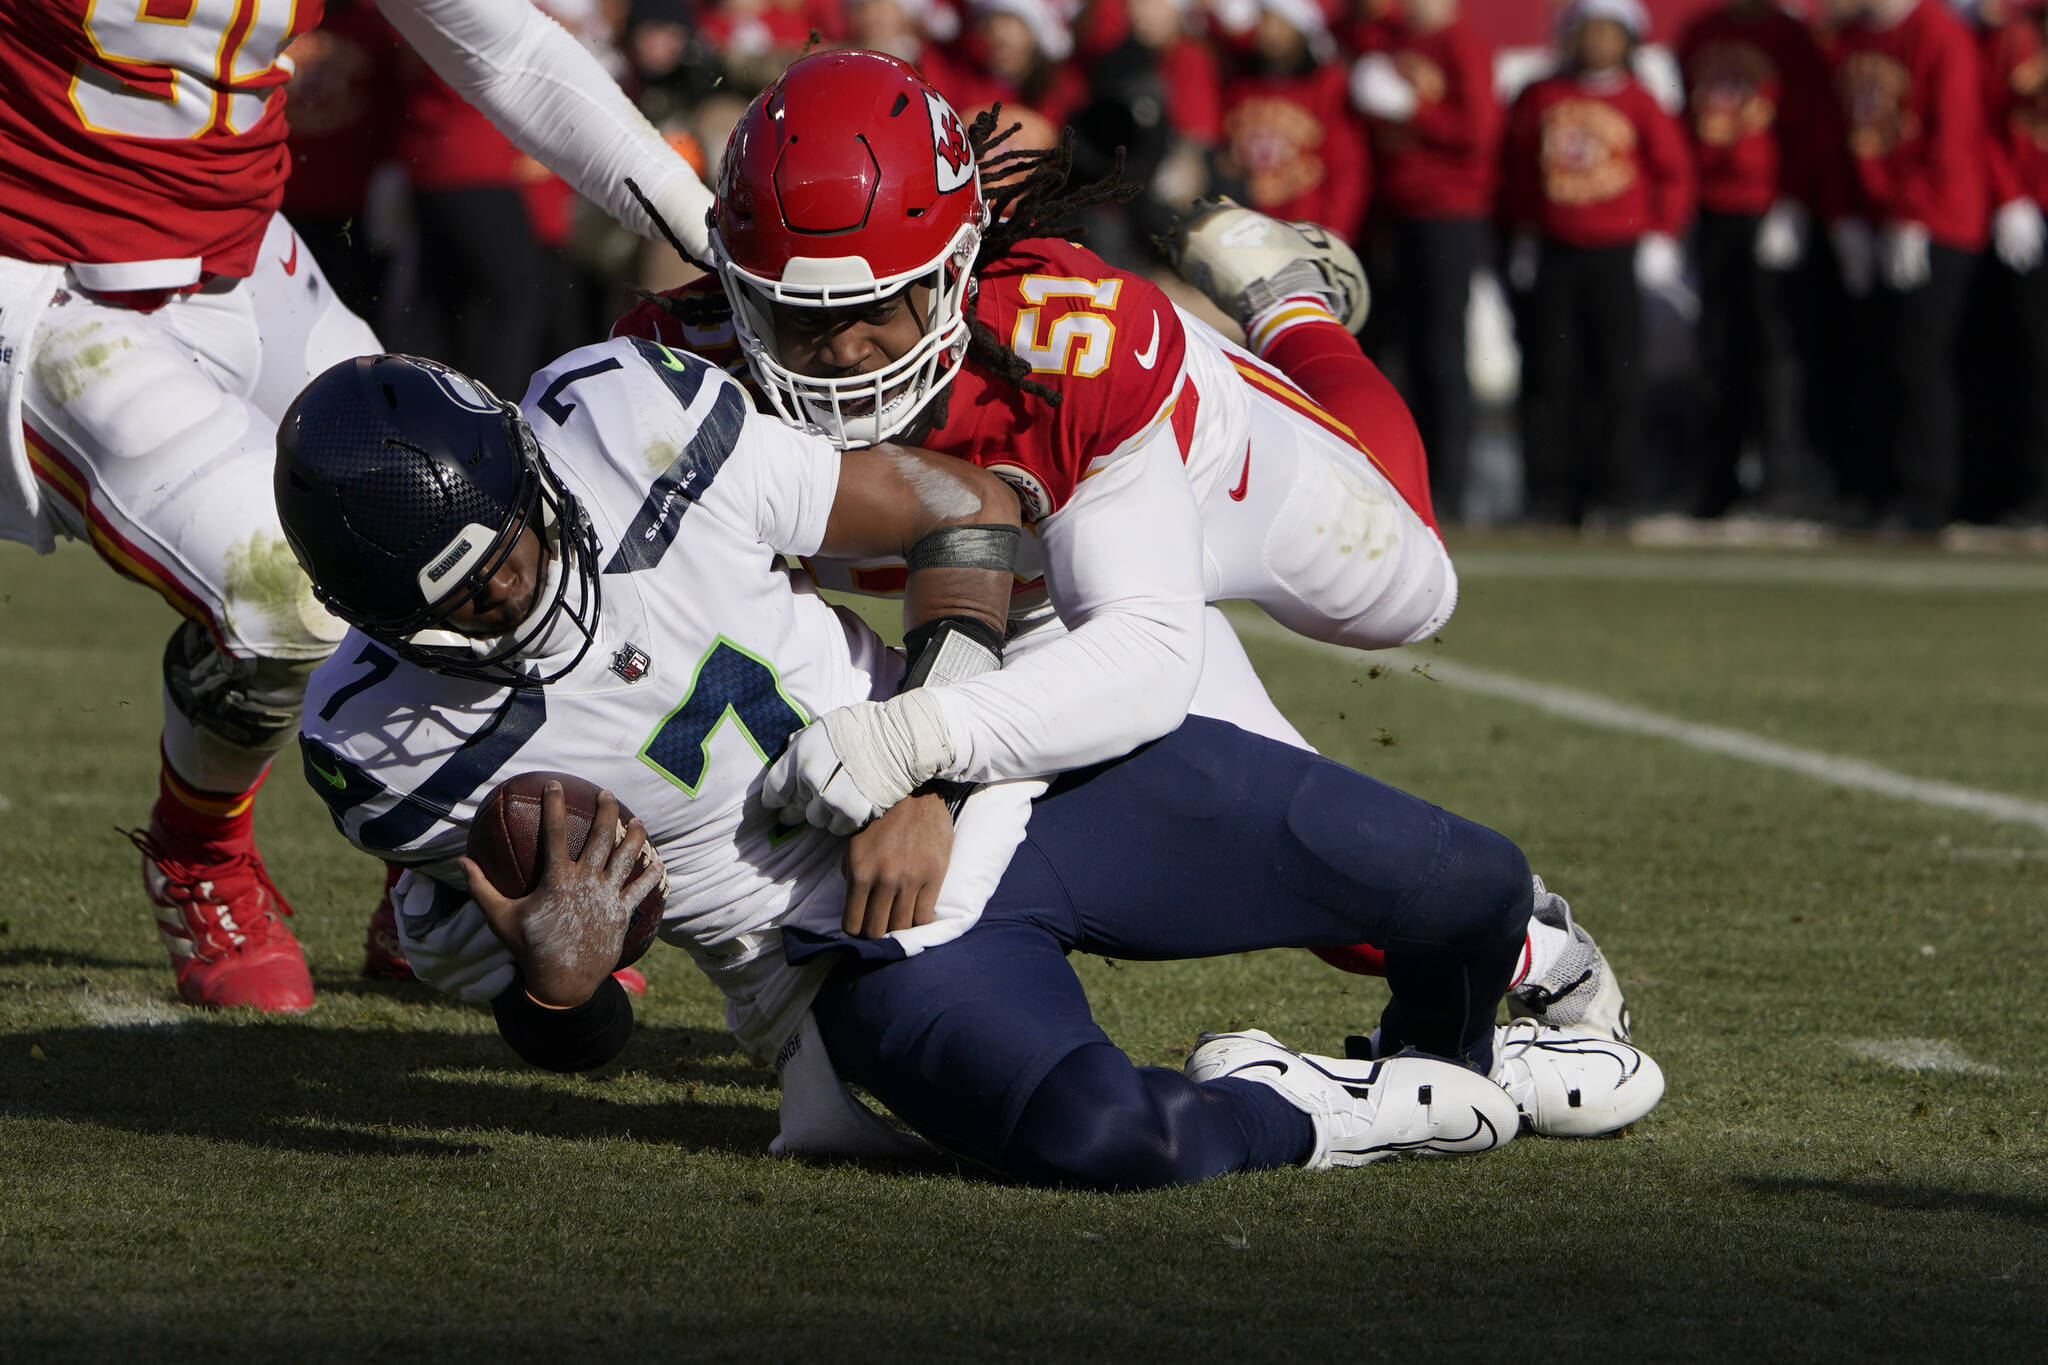 Grading the Seahawks in their 24-10 loss to the Chiefs